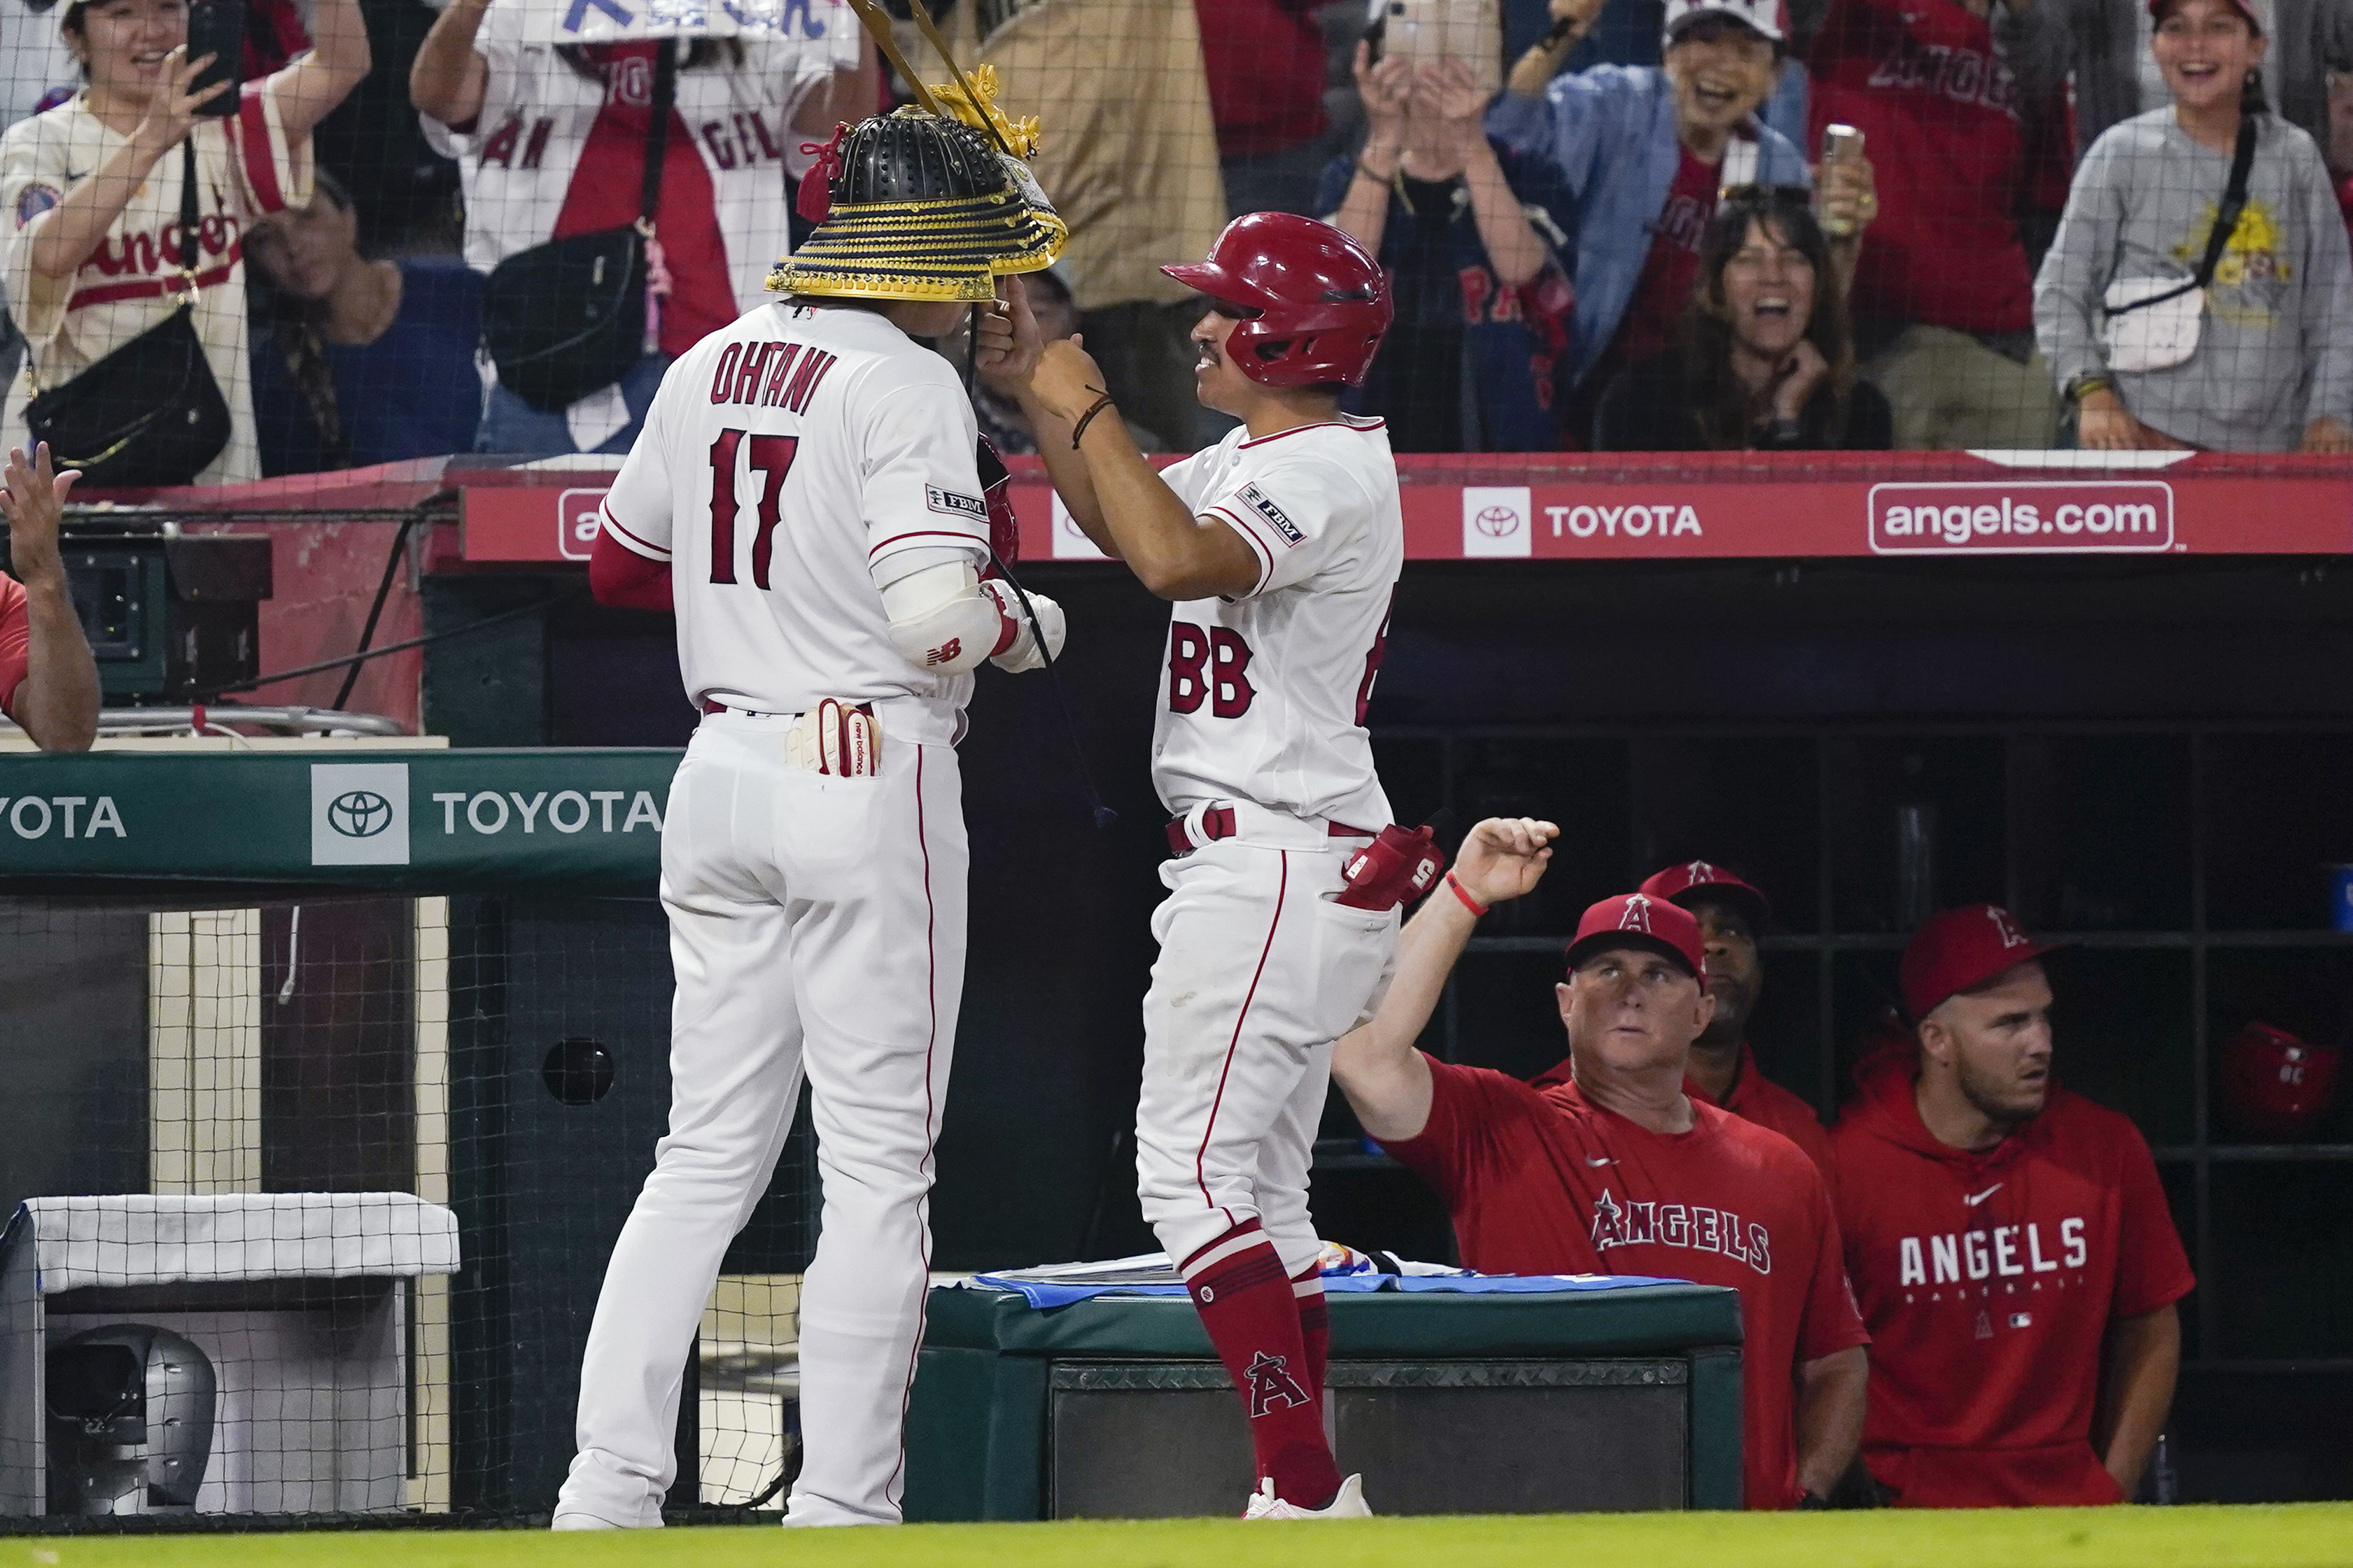 Ohtani takes no-hitter into 8th, Angels beat Athletics 4-2